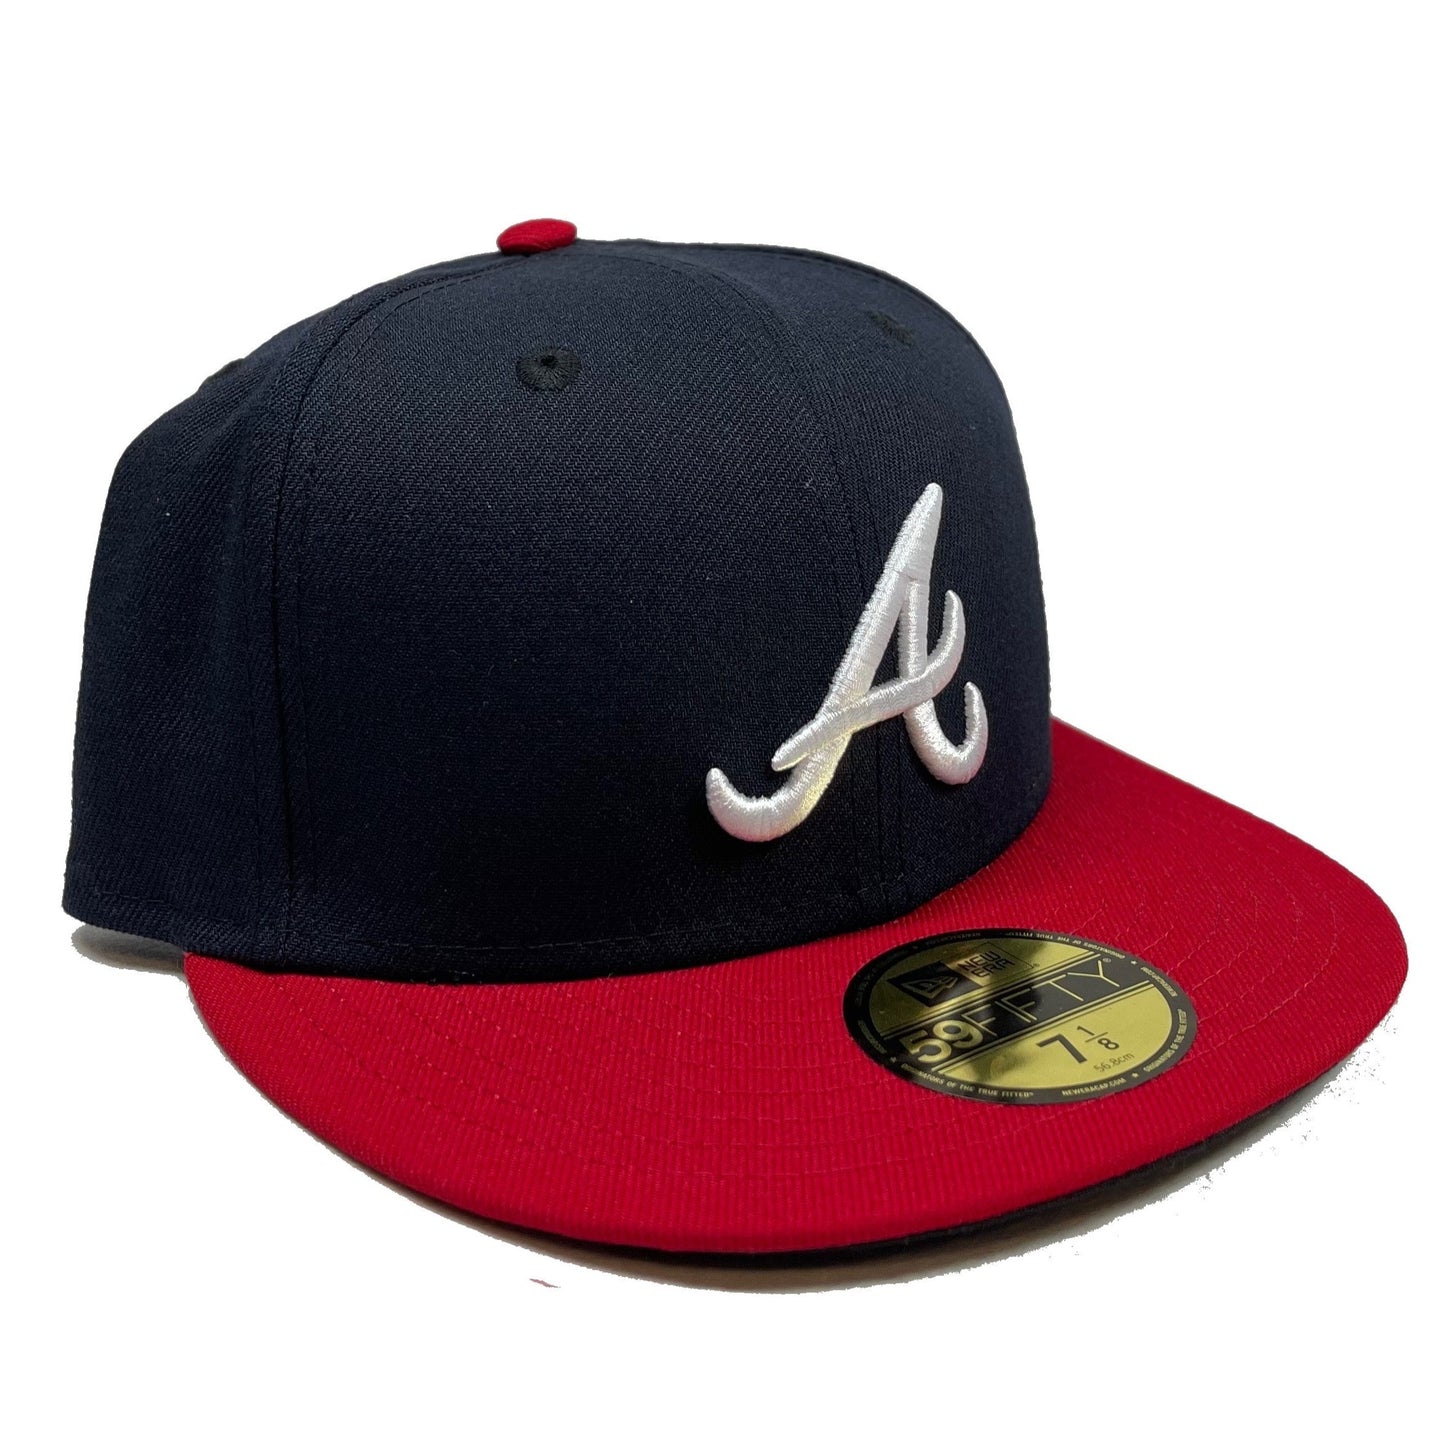 Atlanta Braves (Navy/Red) Fitted